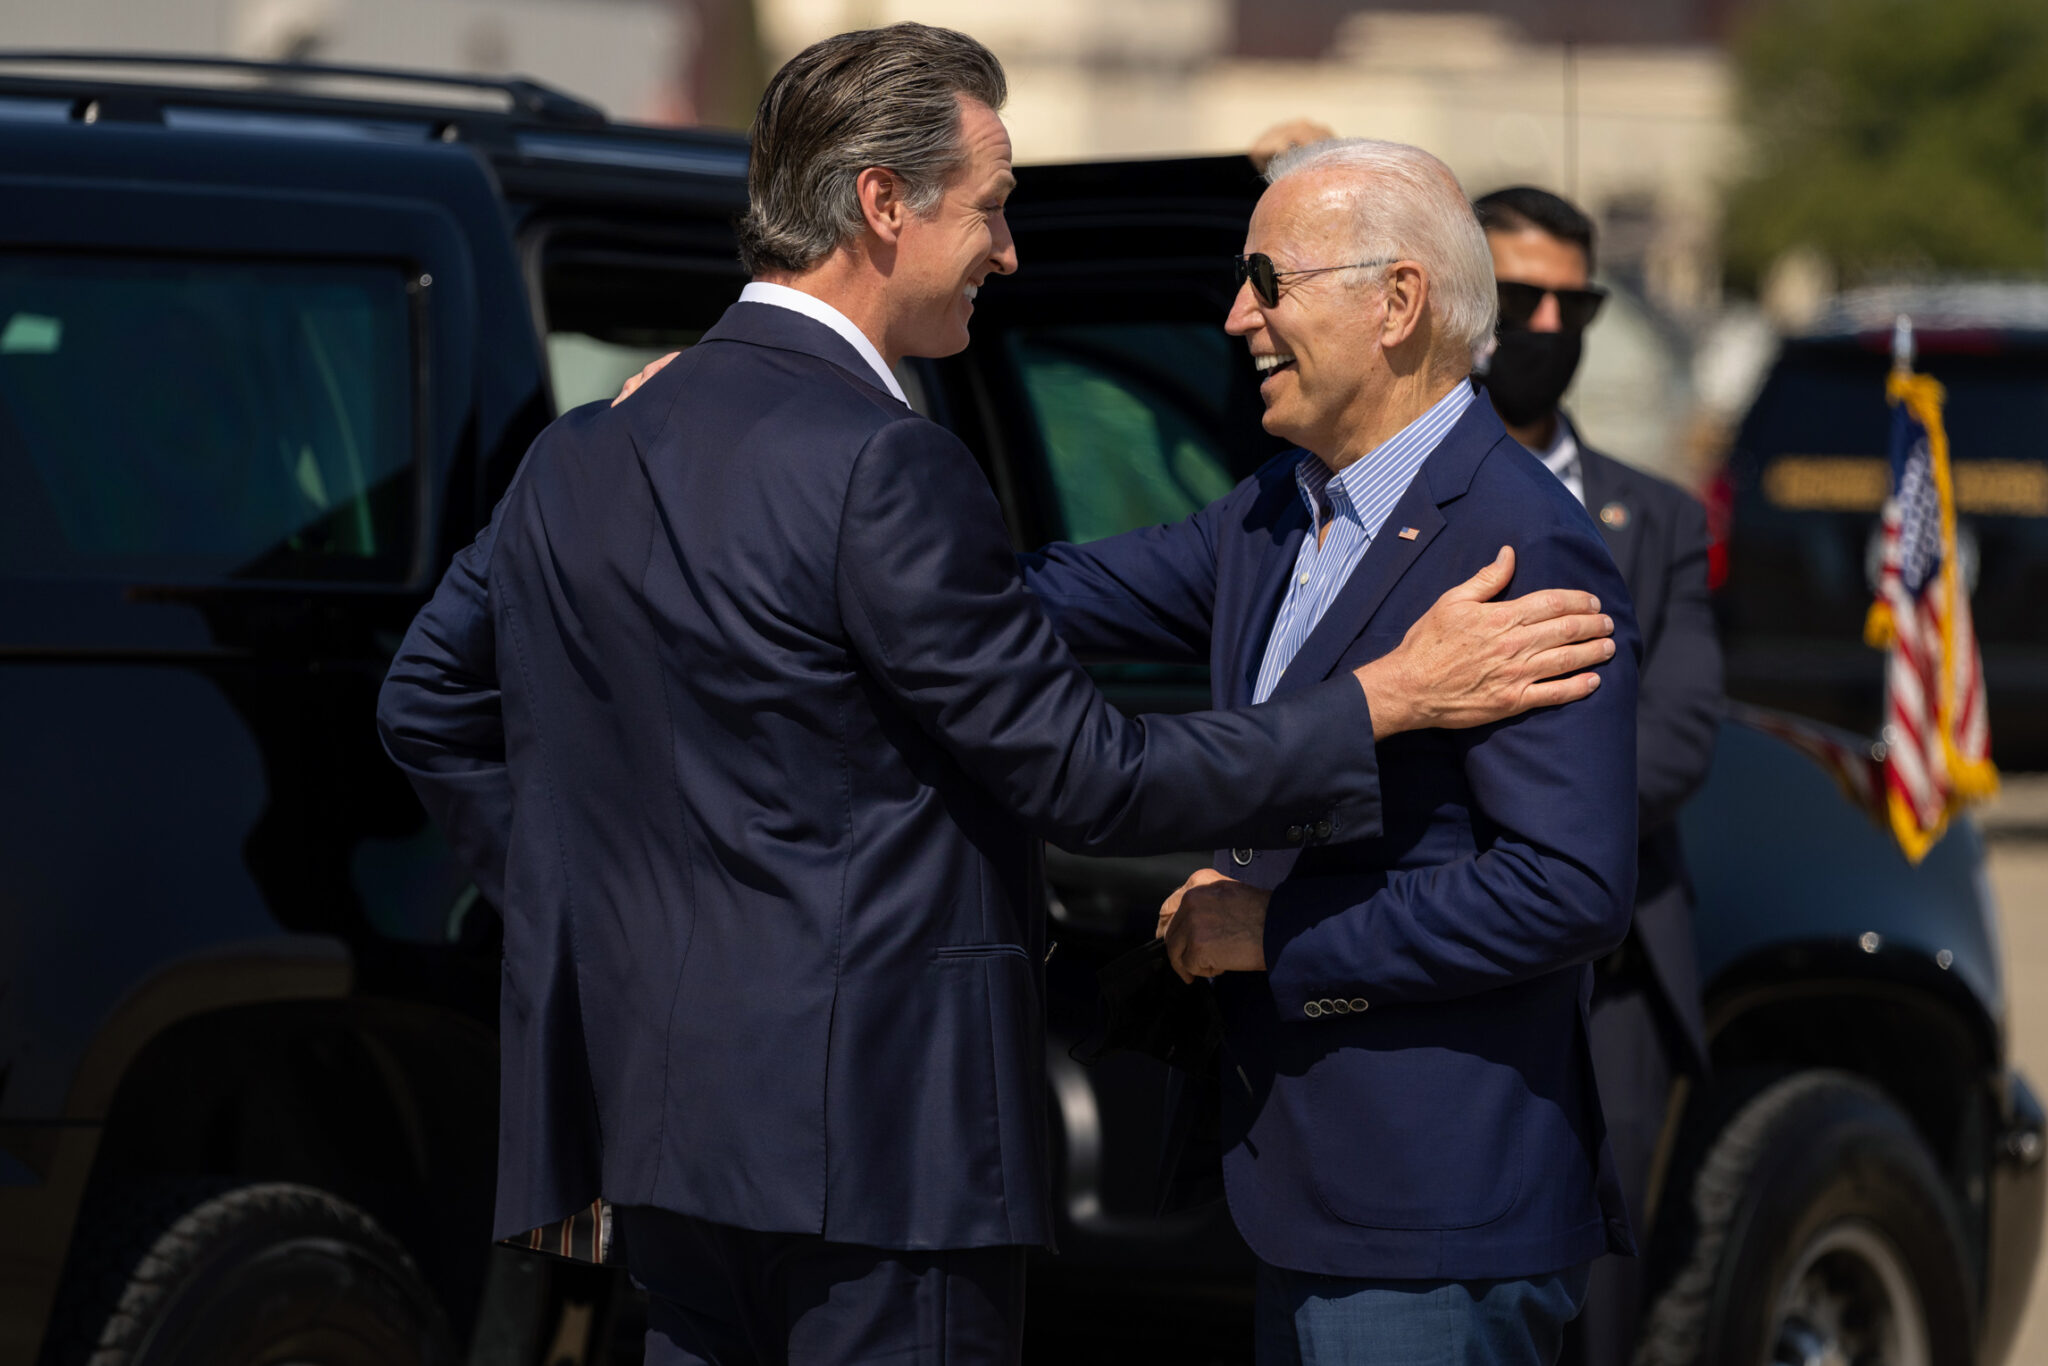 'I love our prospects': California governor stumps for Biden in Bluffton